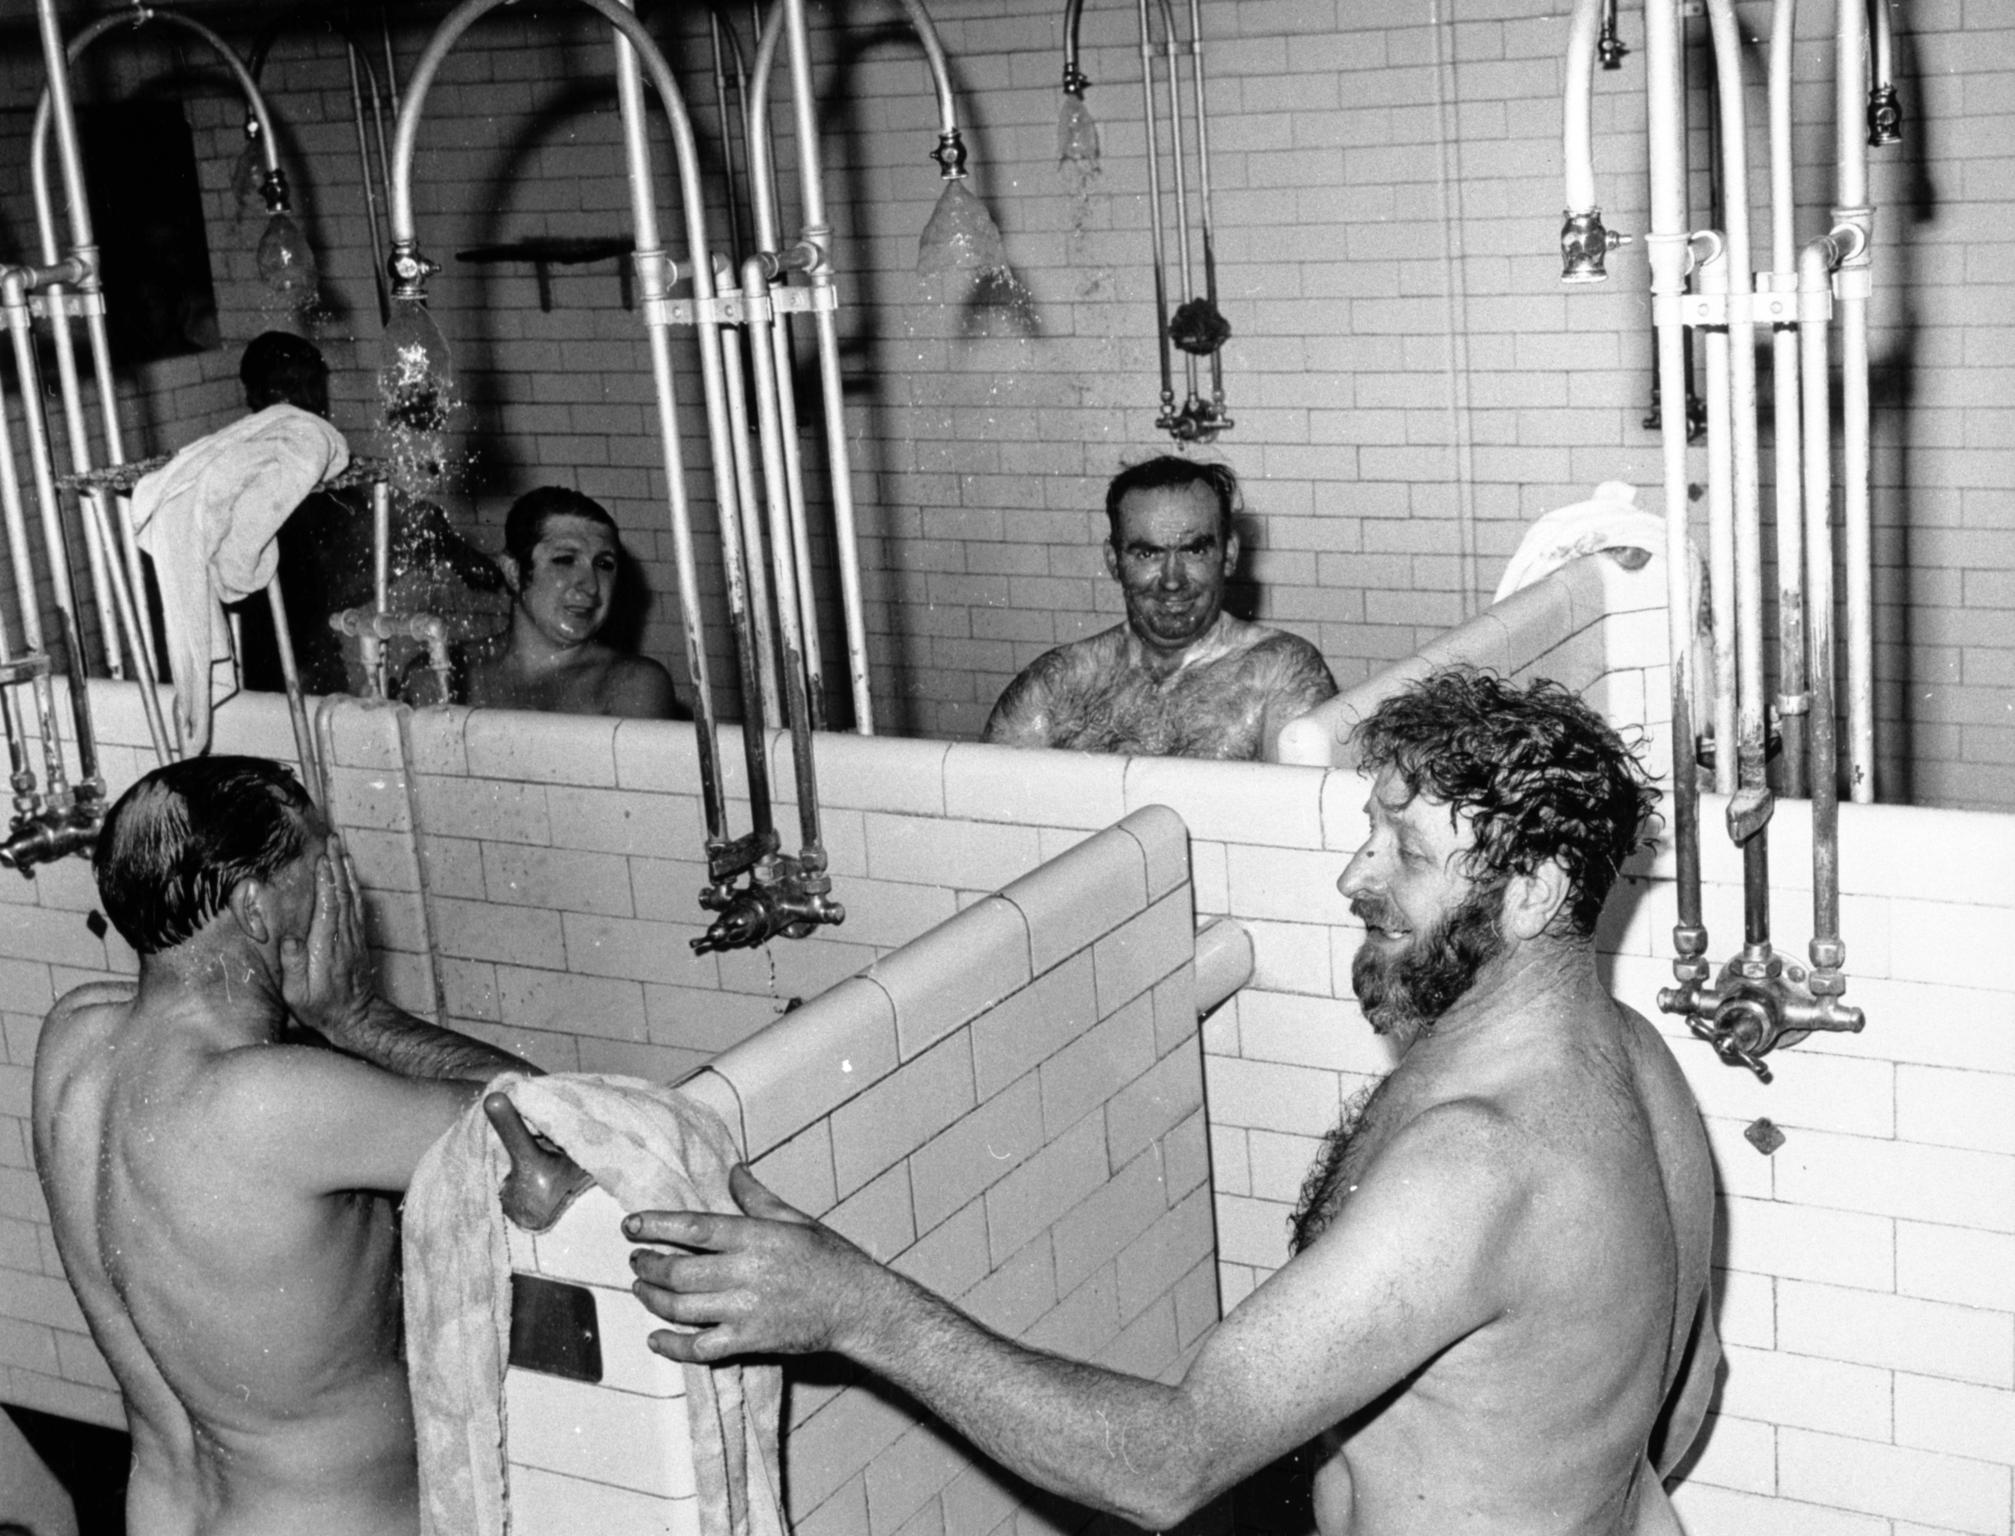 Miner's showering, photograph